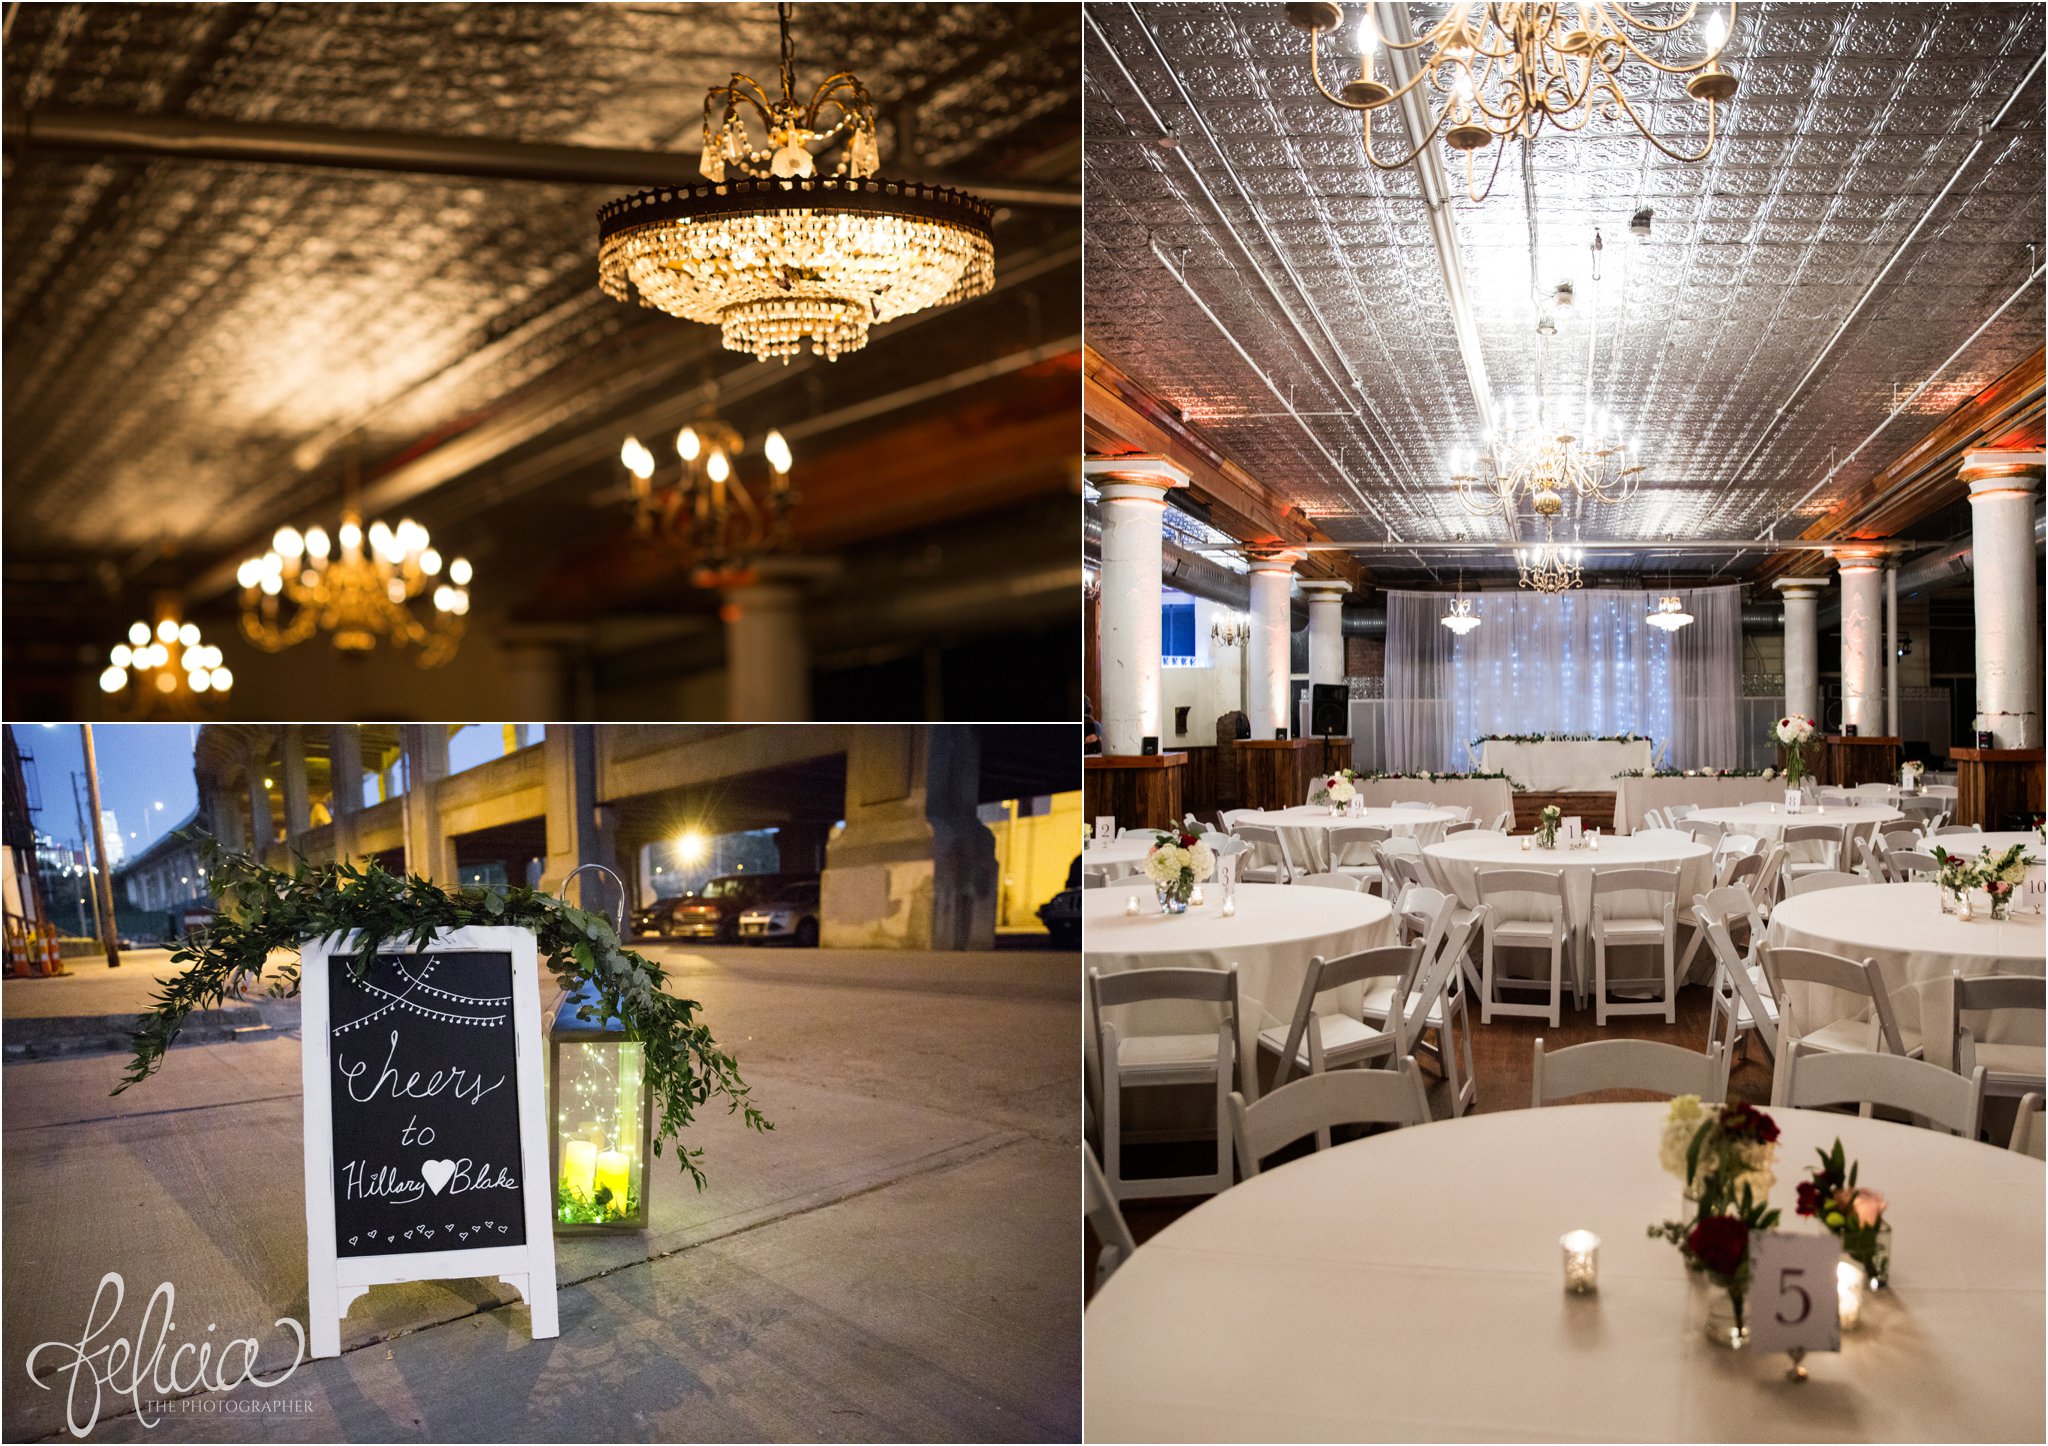 wedding | wedding photos | Rumely Event Space | wedding photography | images by feliciathephotographer.com | historic venue | tile ceilings | chandelier | chalkboard signs | reception decor | wedding reception